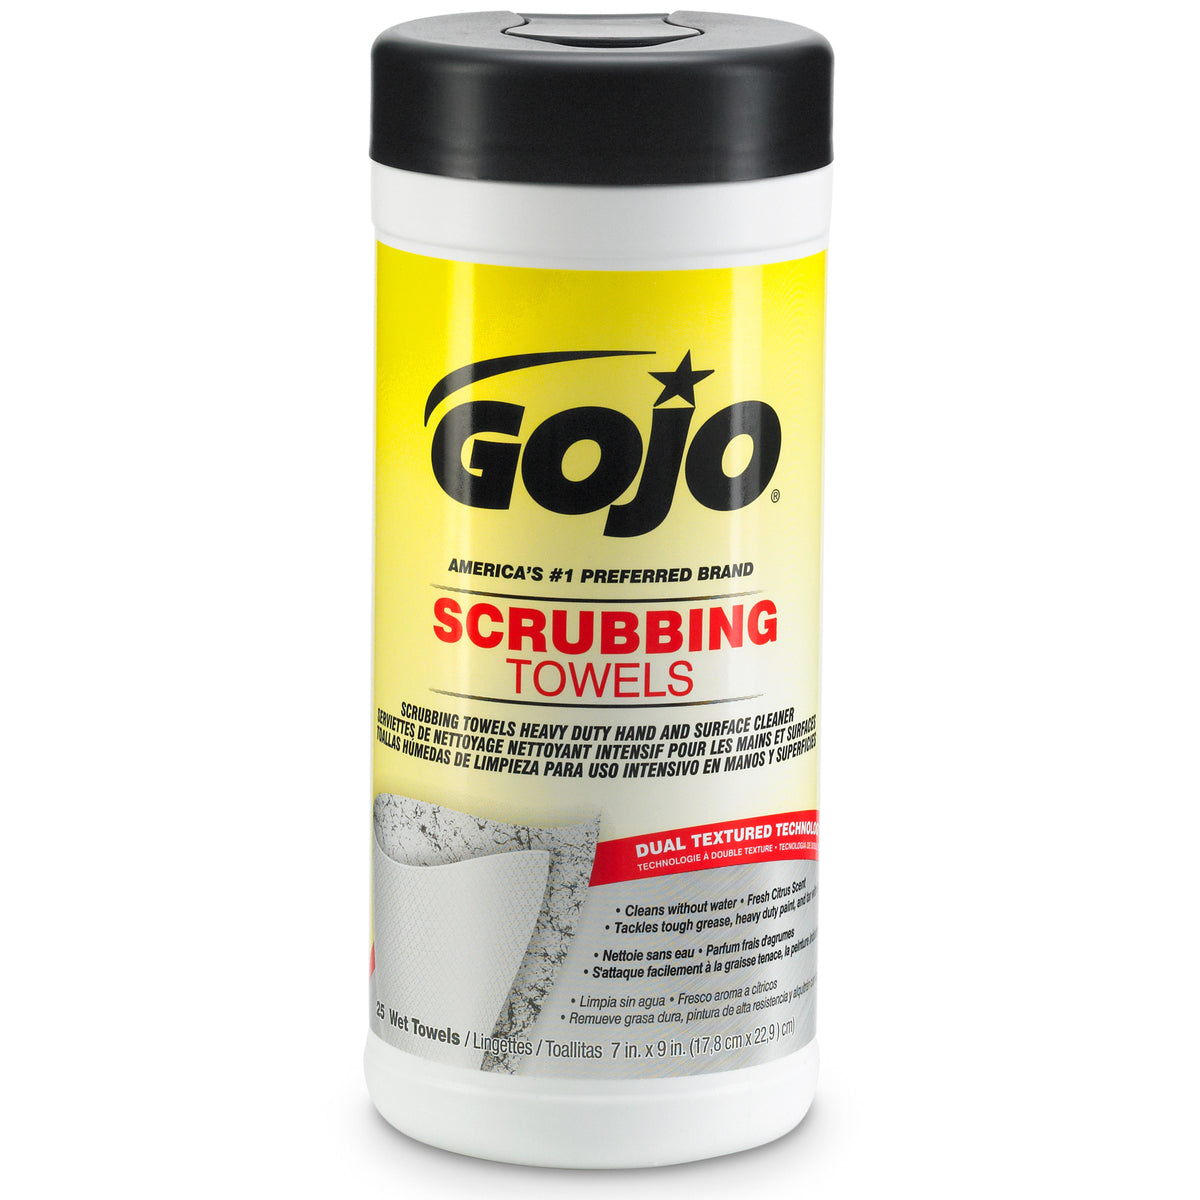 GOJO Scrubbing Towels 25-Count Hand Soap at